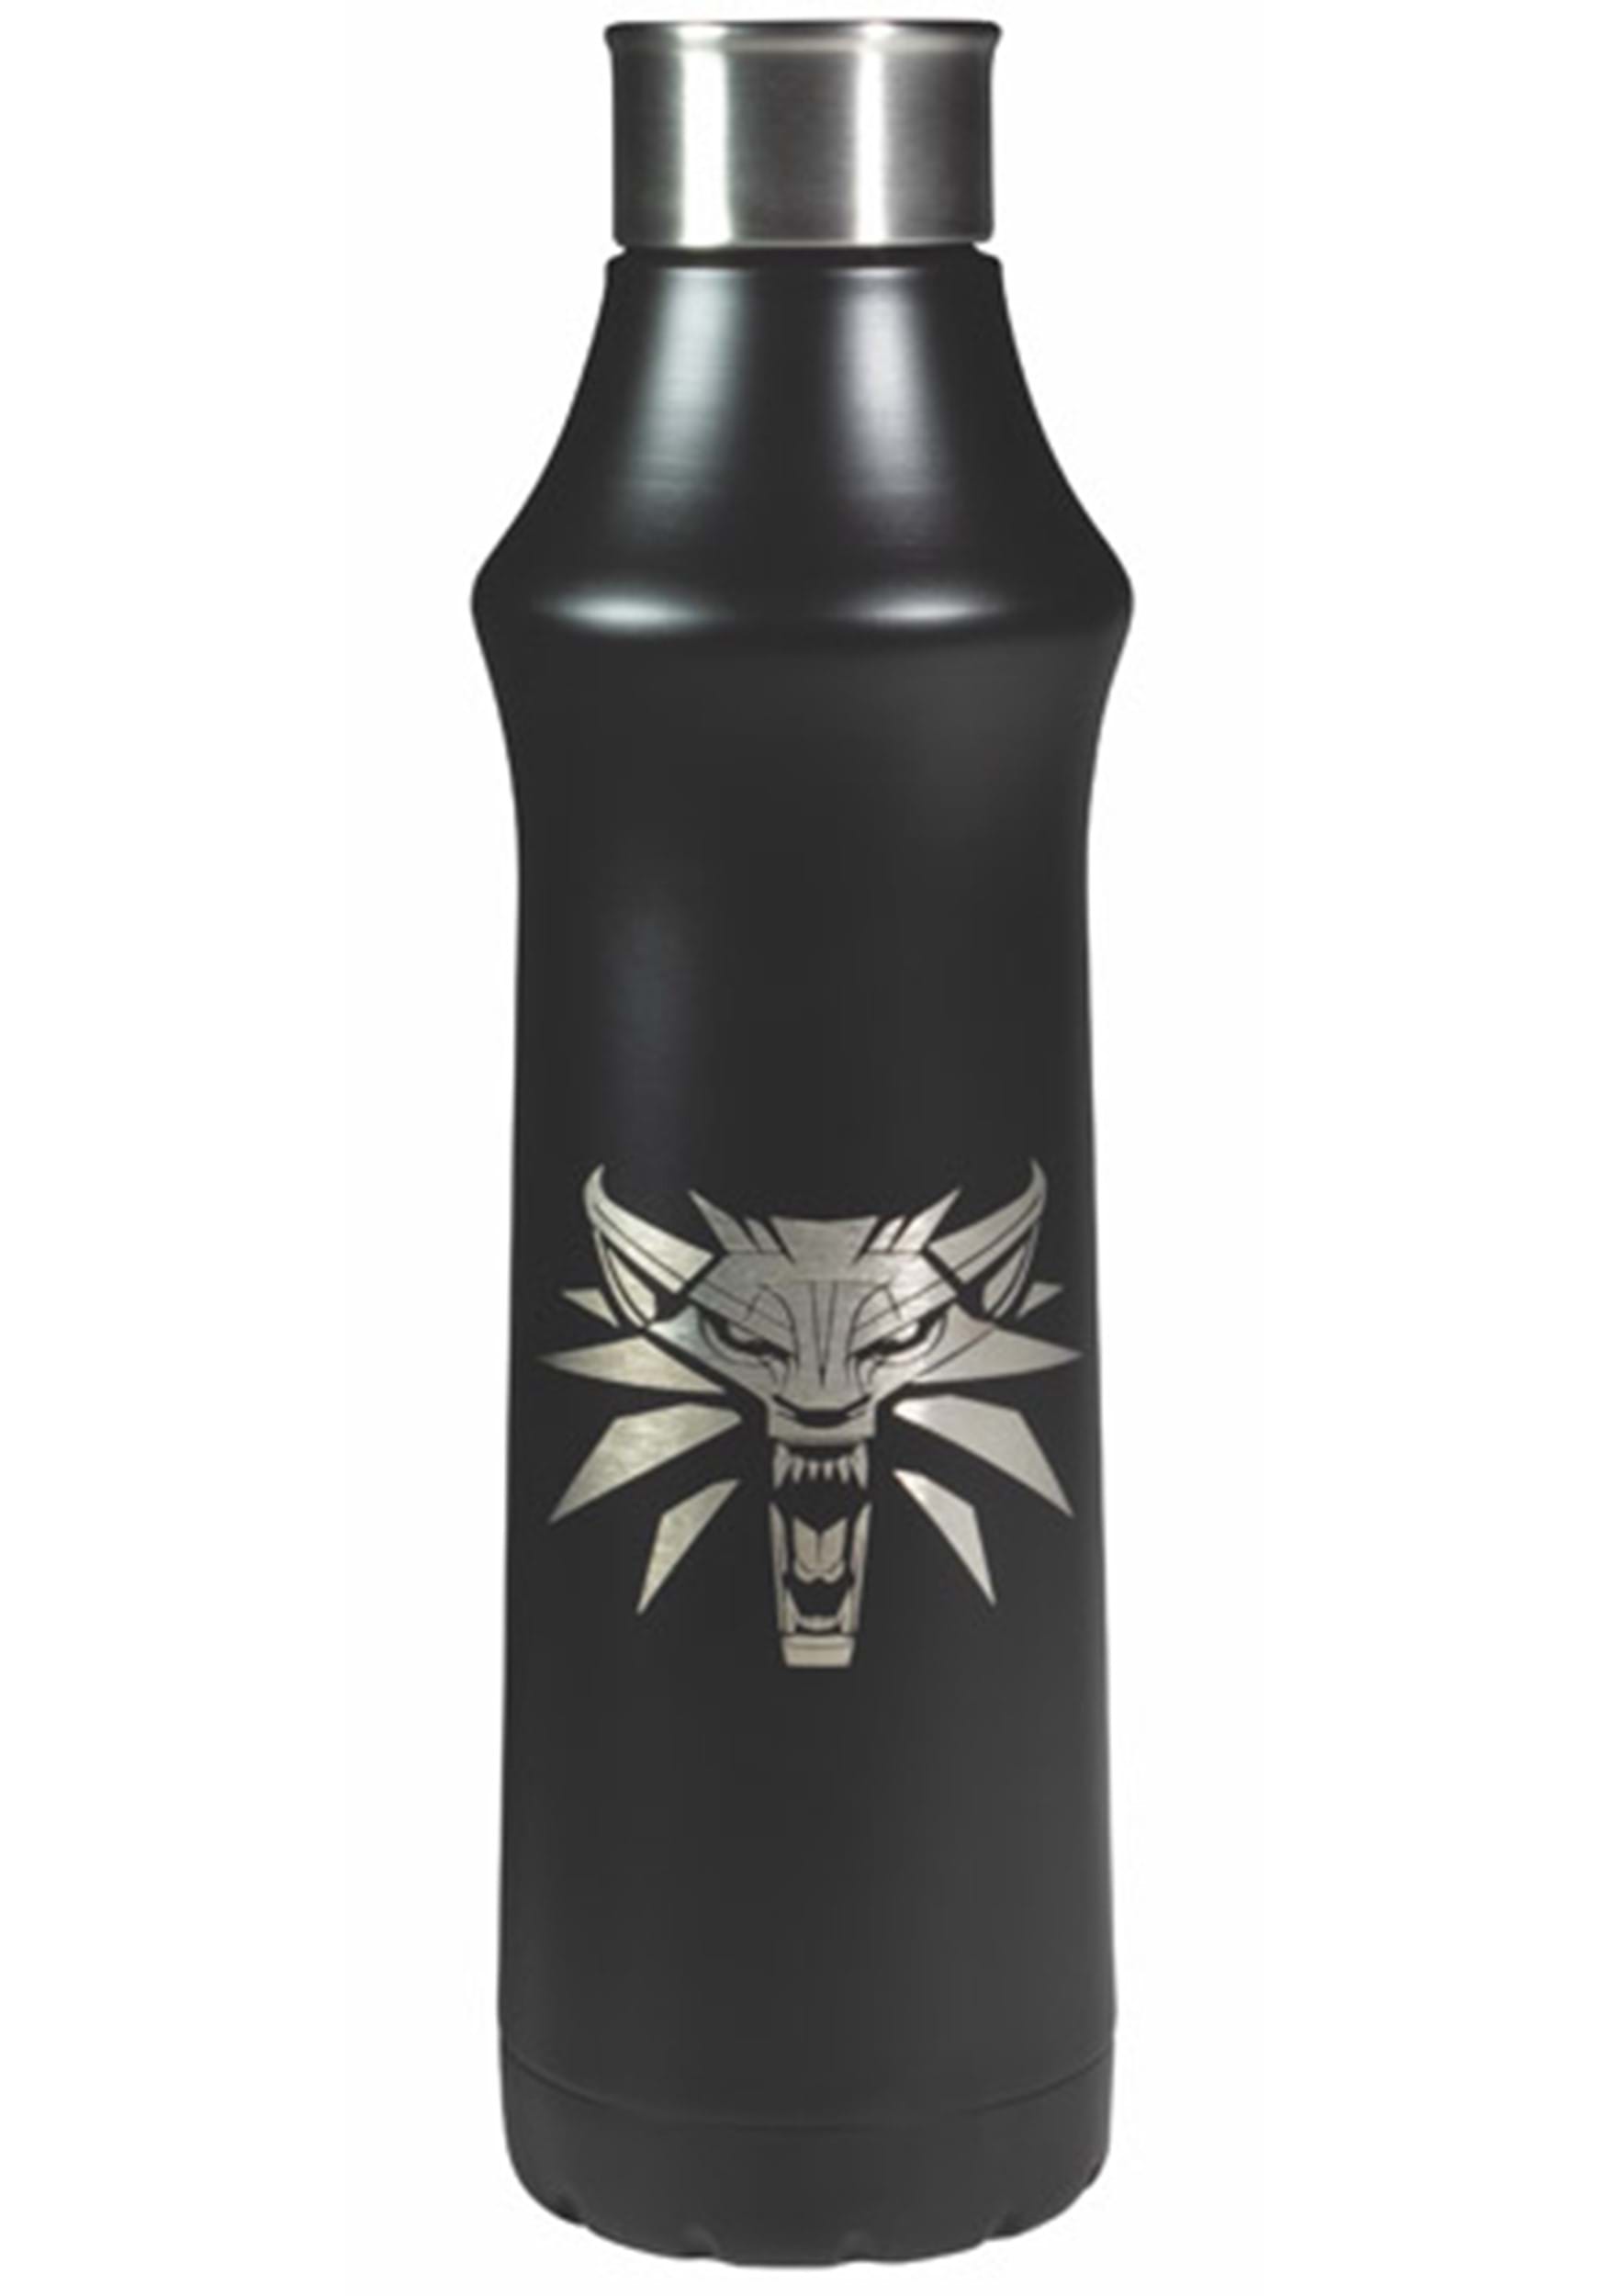 https://images.fun.com/products/73995/1-1/the-witcher-3-wild-hunt-water-bottle.jpg